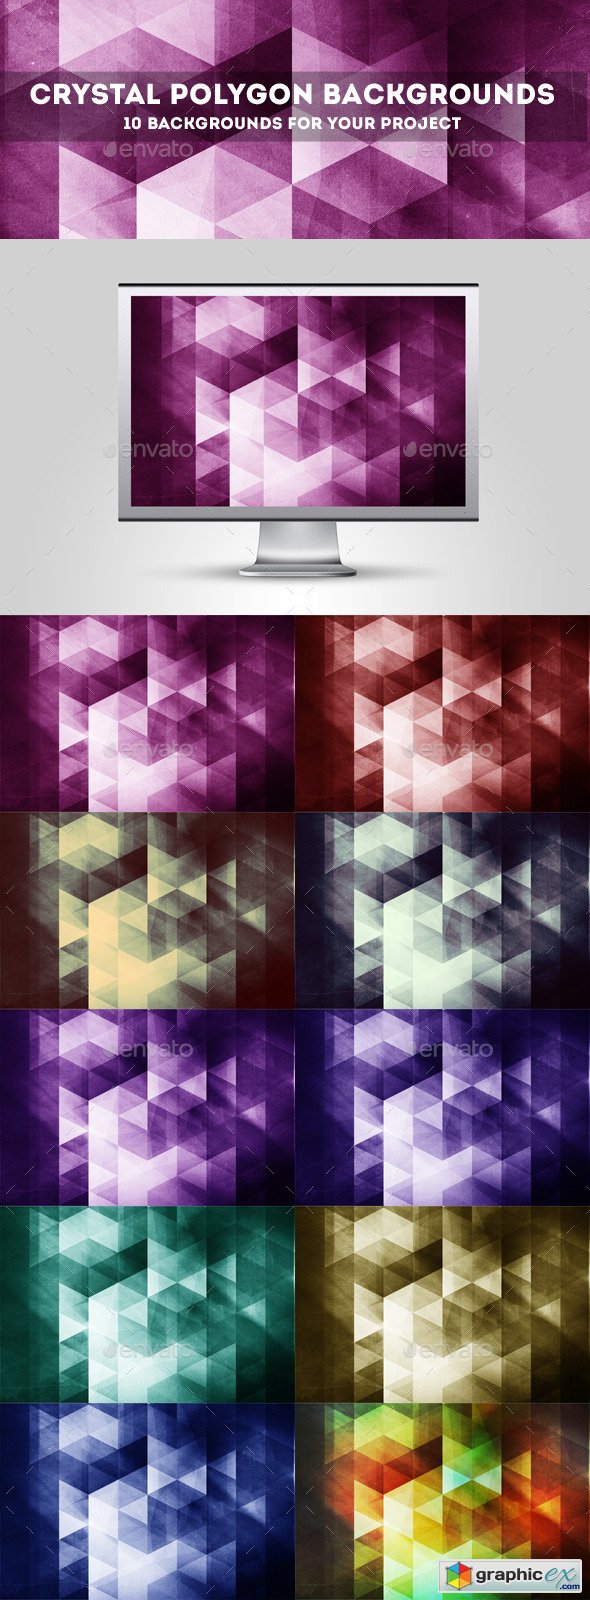 Crystal Polygon Abstract Backgrounds